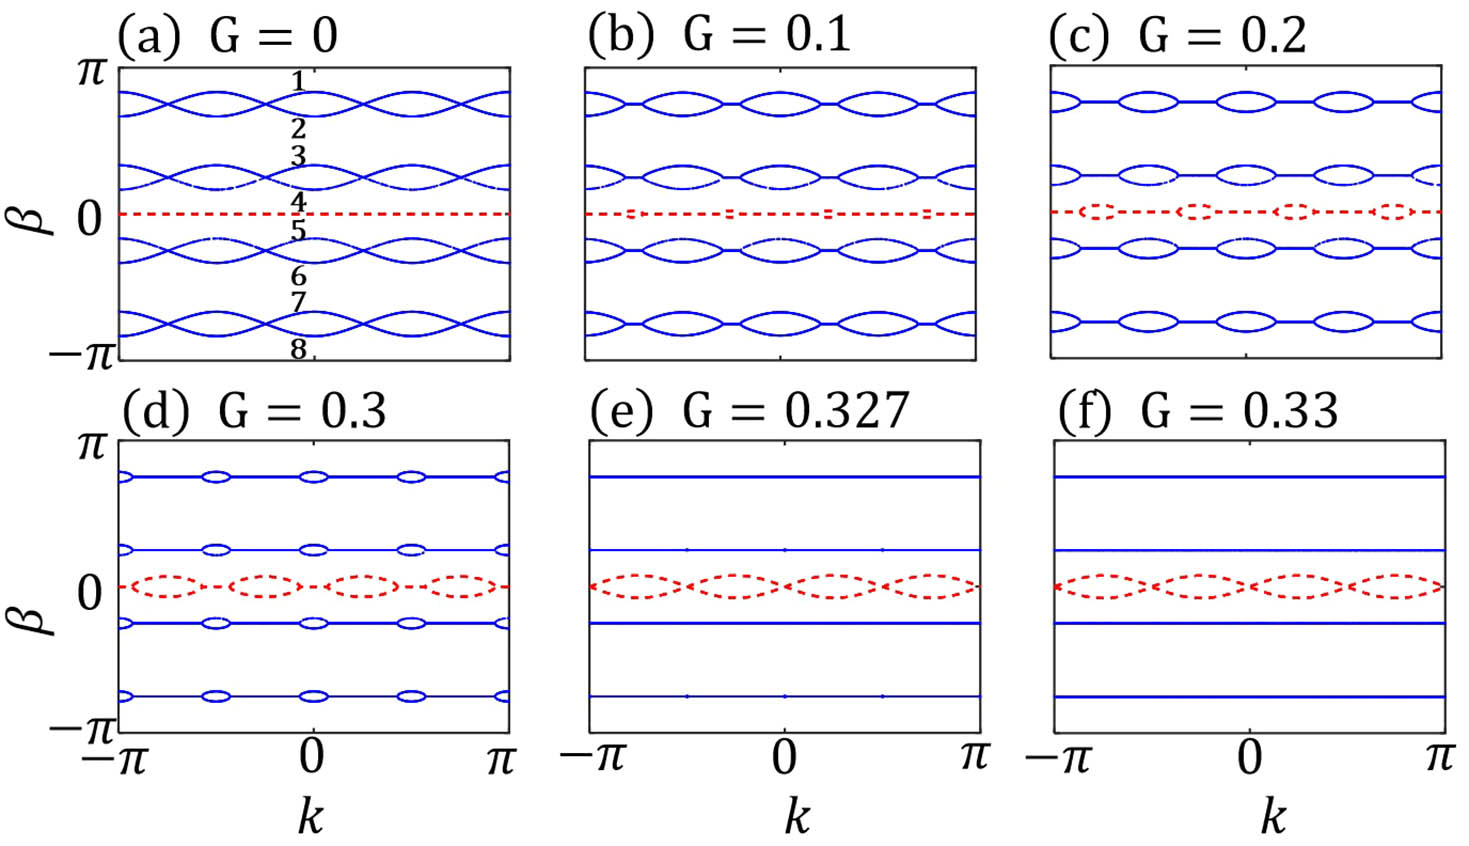 Band structures for G = 0, G = 0.1, G = 0.2, G = 0.3, G = 0.327, and G = 0.33, respectively. φ = π/2. The blue line represents the real part of the band, and the red line represents the imaginary part of the band.